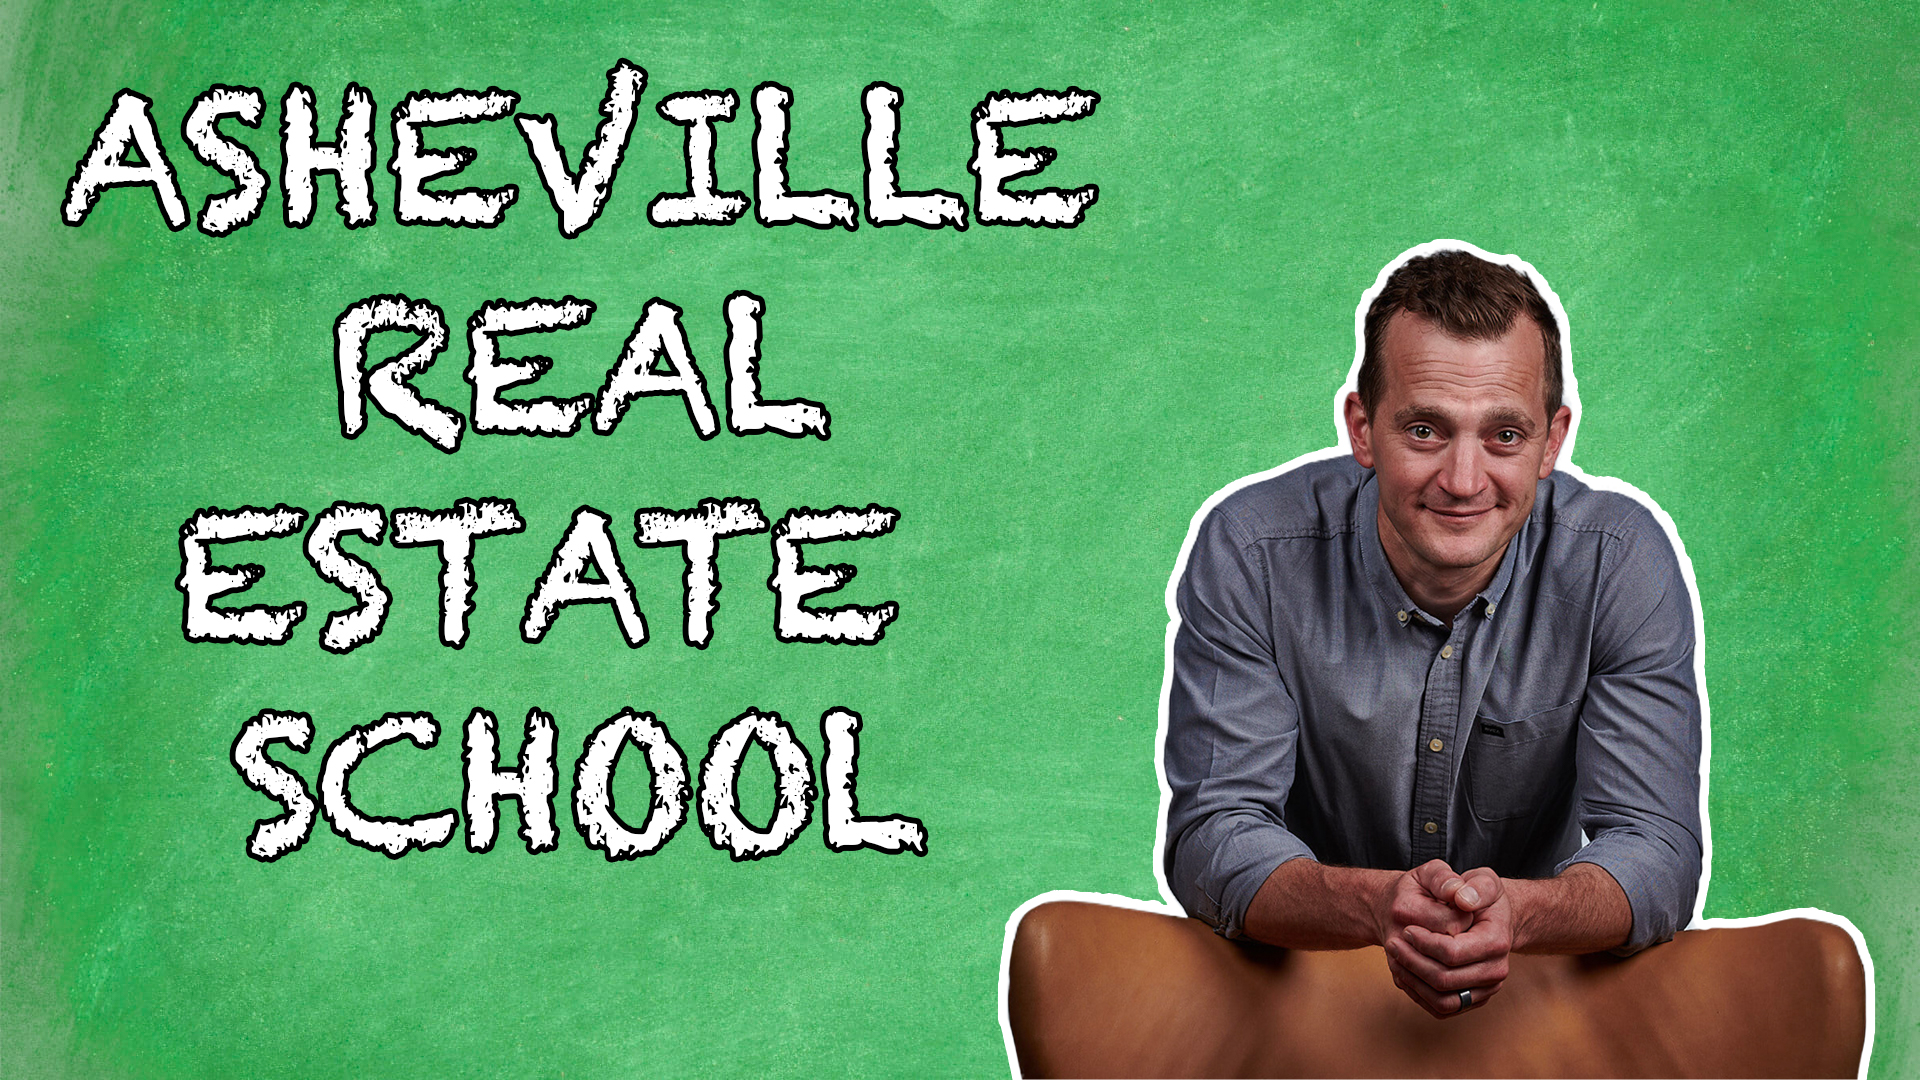 You are currently viewing 173. Avl WNC School of Real Estate with Johnny Kucsera